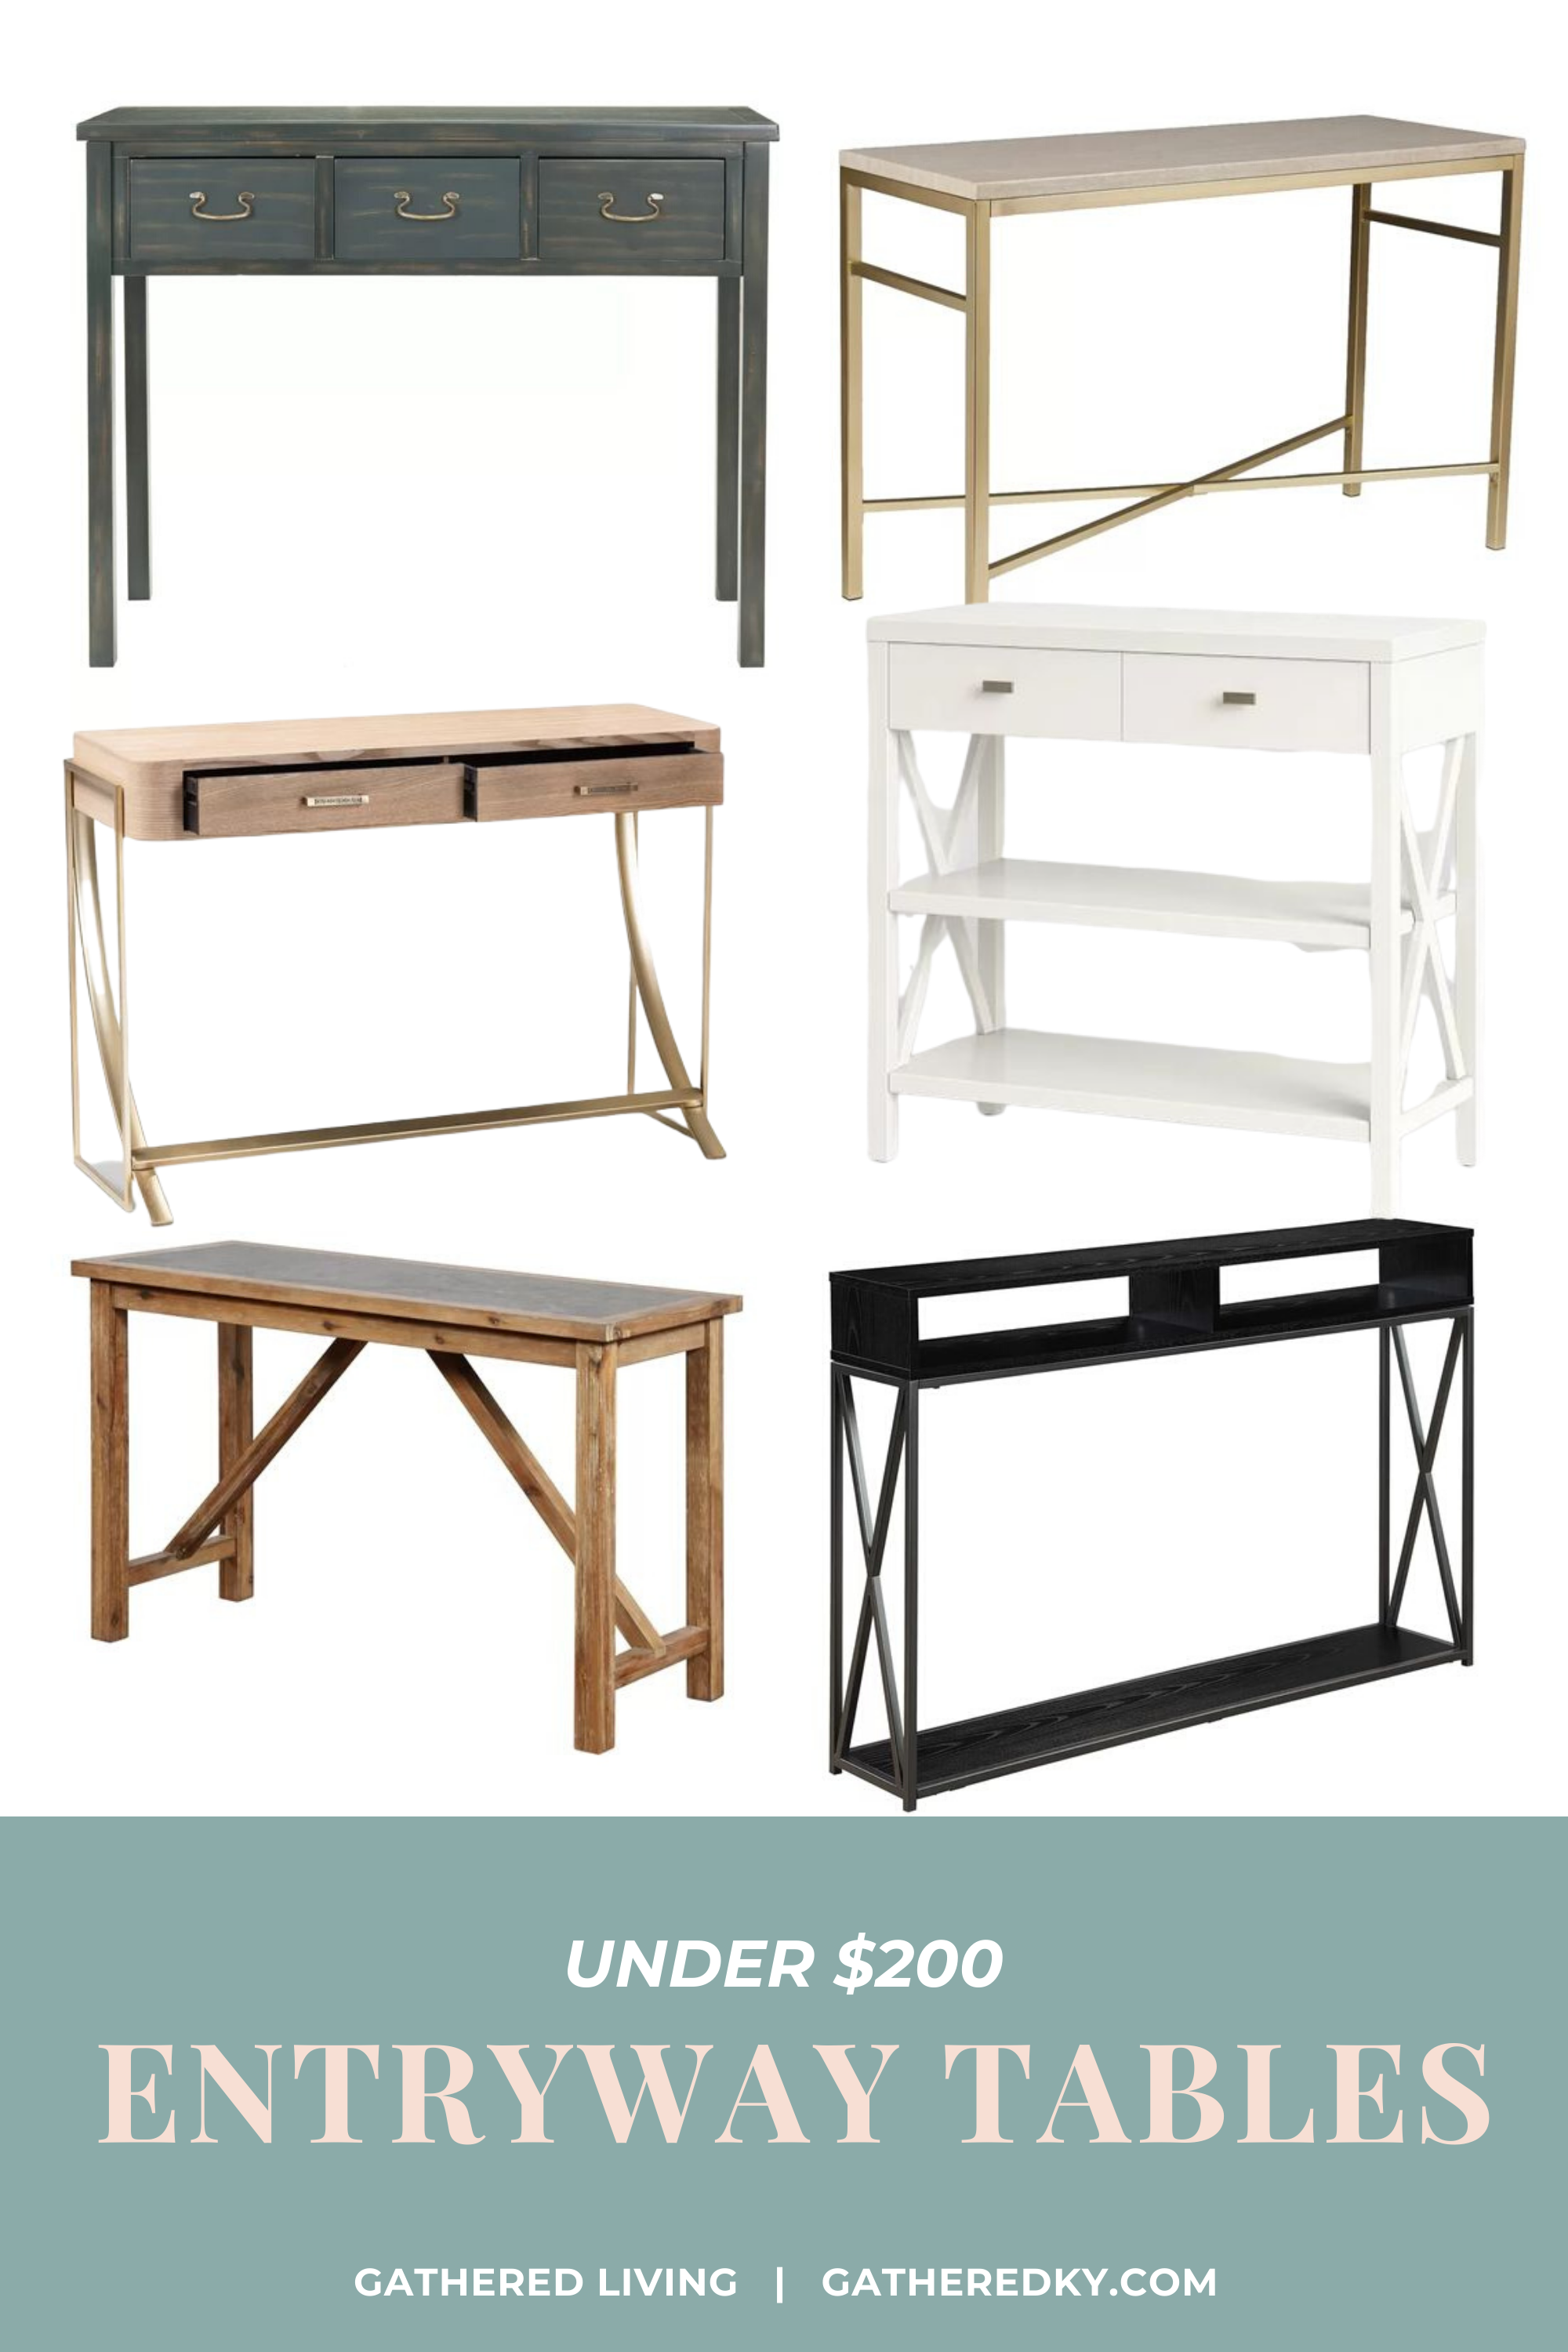 Entryway Tables For Less Than 200 Gathered Living